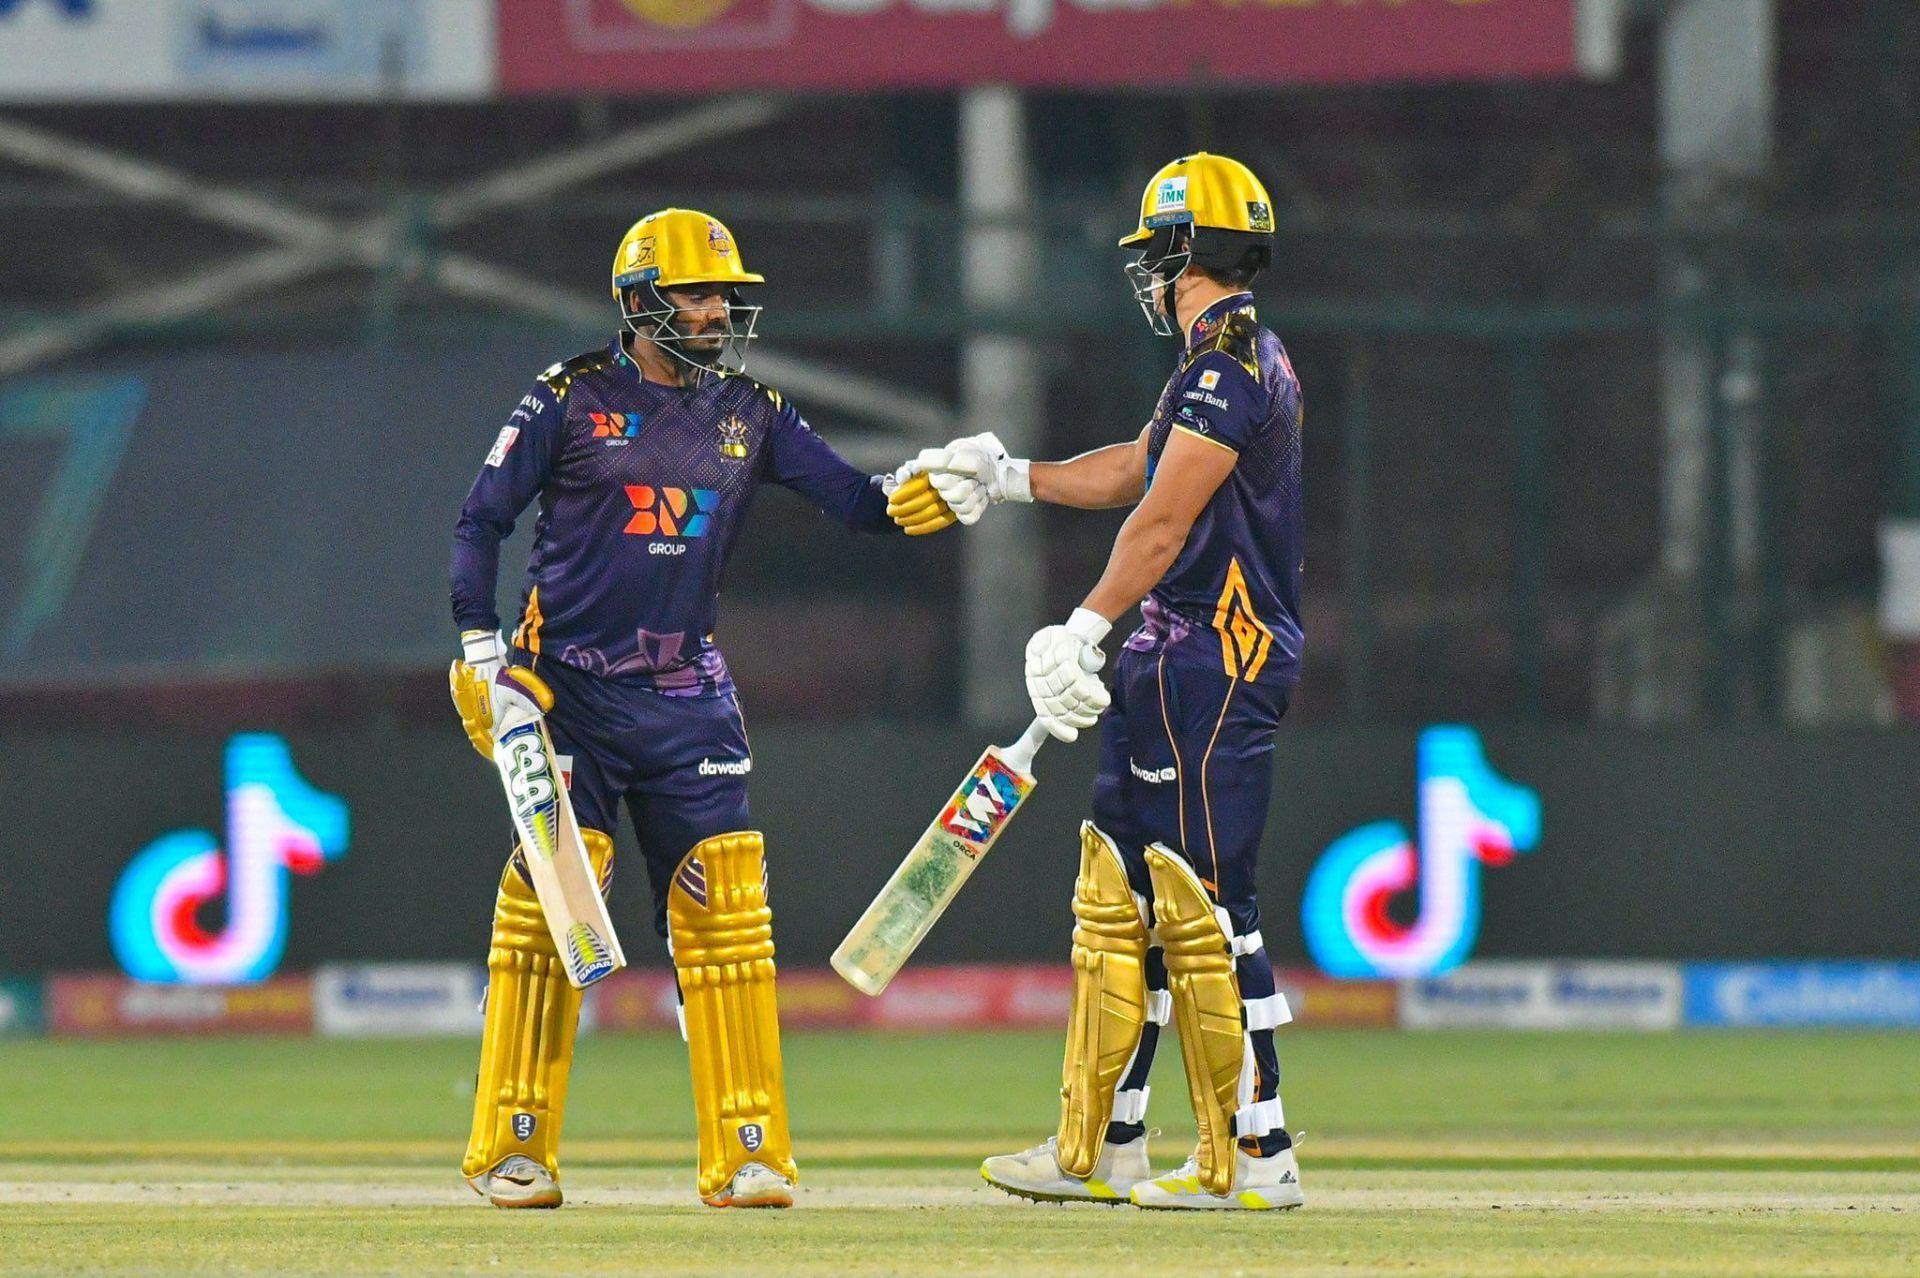 Will Smeed and Ahsan Ali of Quetta Gladiators. Courtesy: PSL Twitter